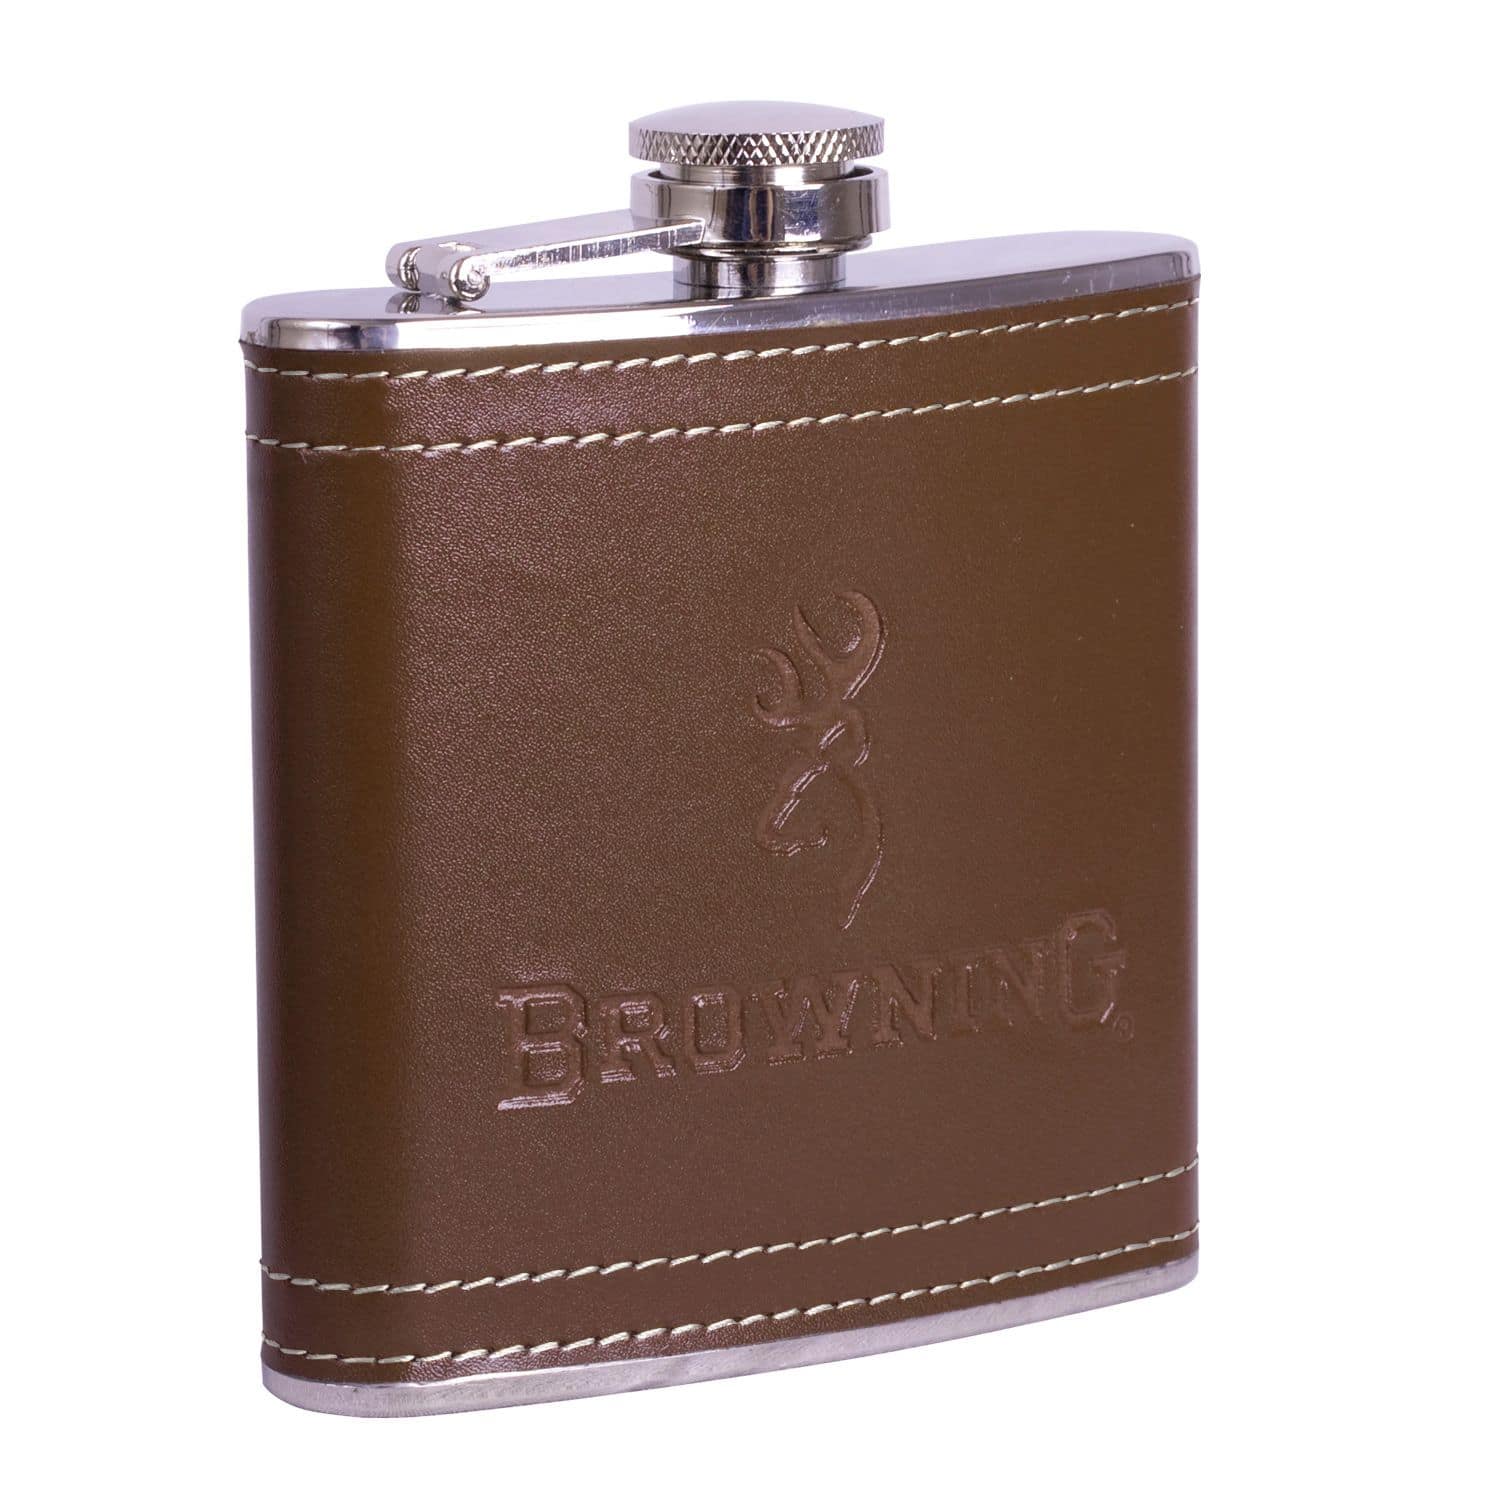 Vintage Flask Kit 6 Oz. — Tandy Leather Canada